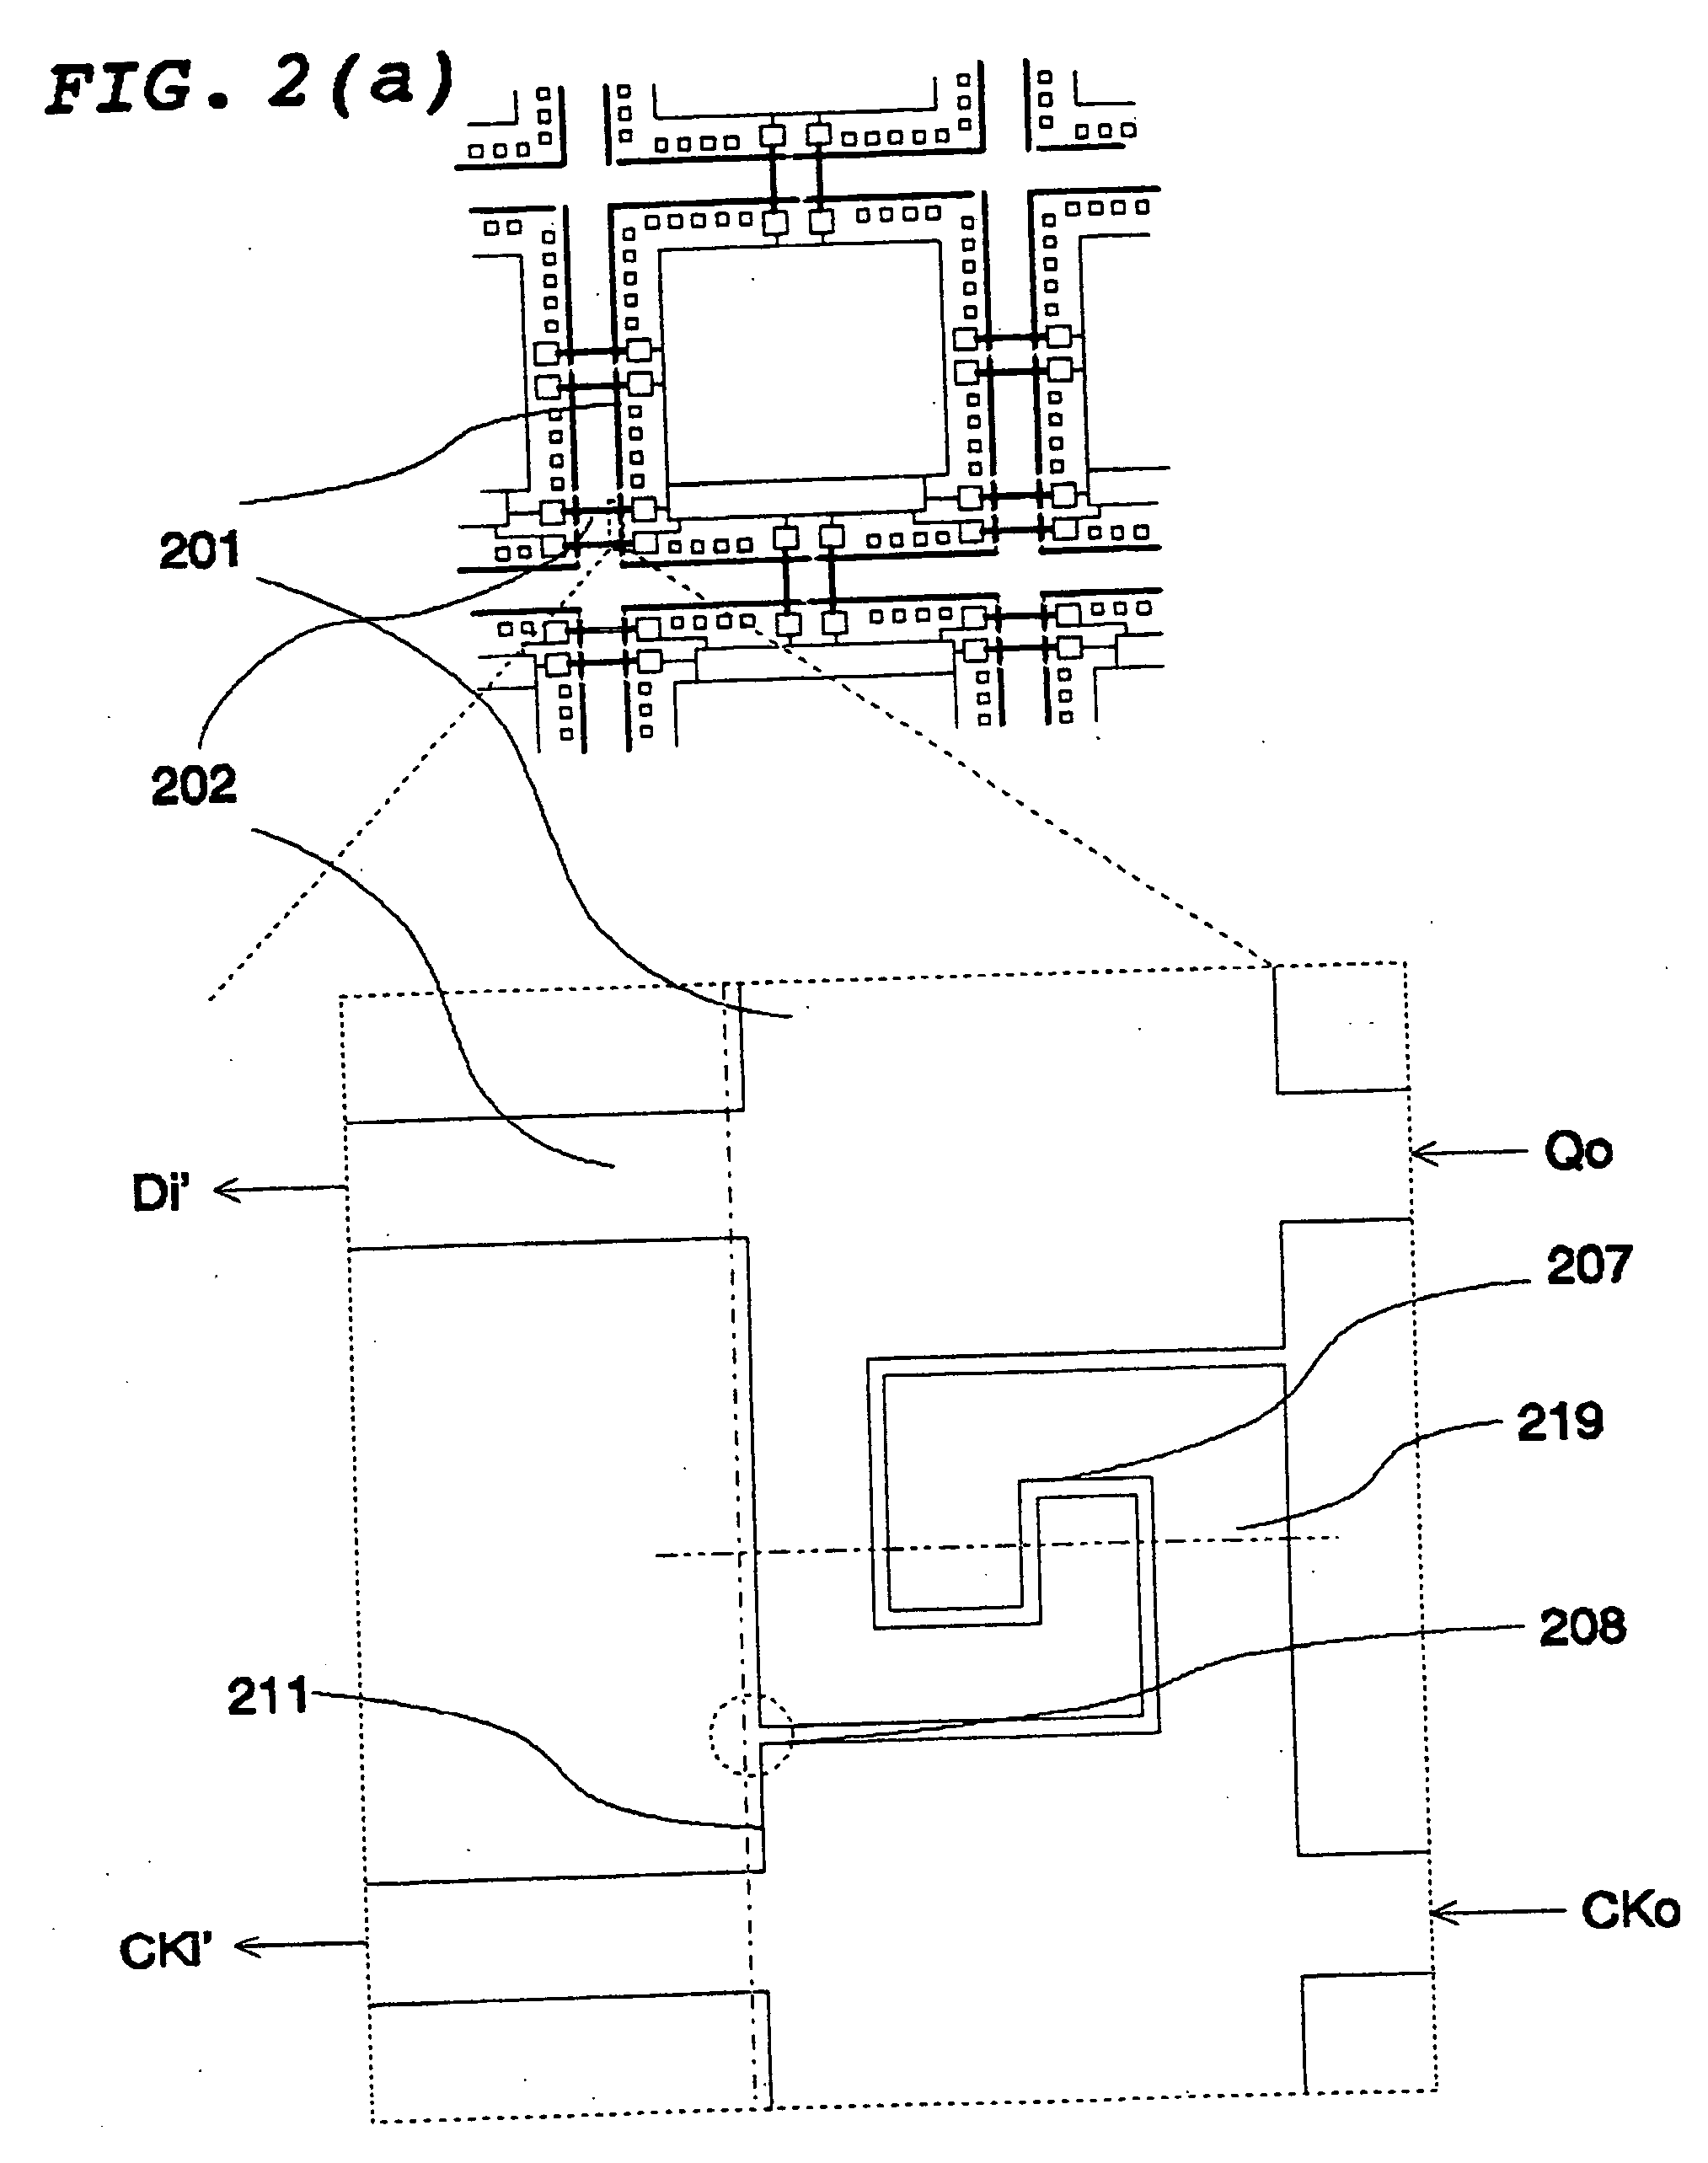 Inter-dice signal transfer methods for integrated circuits